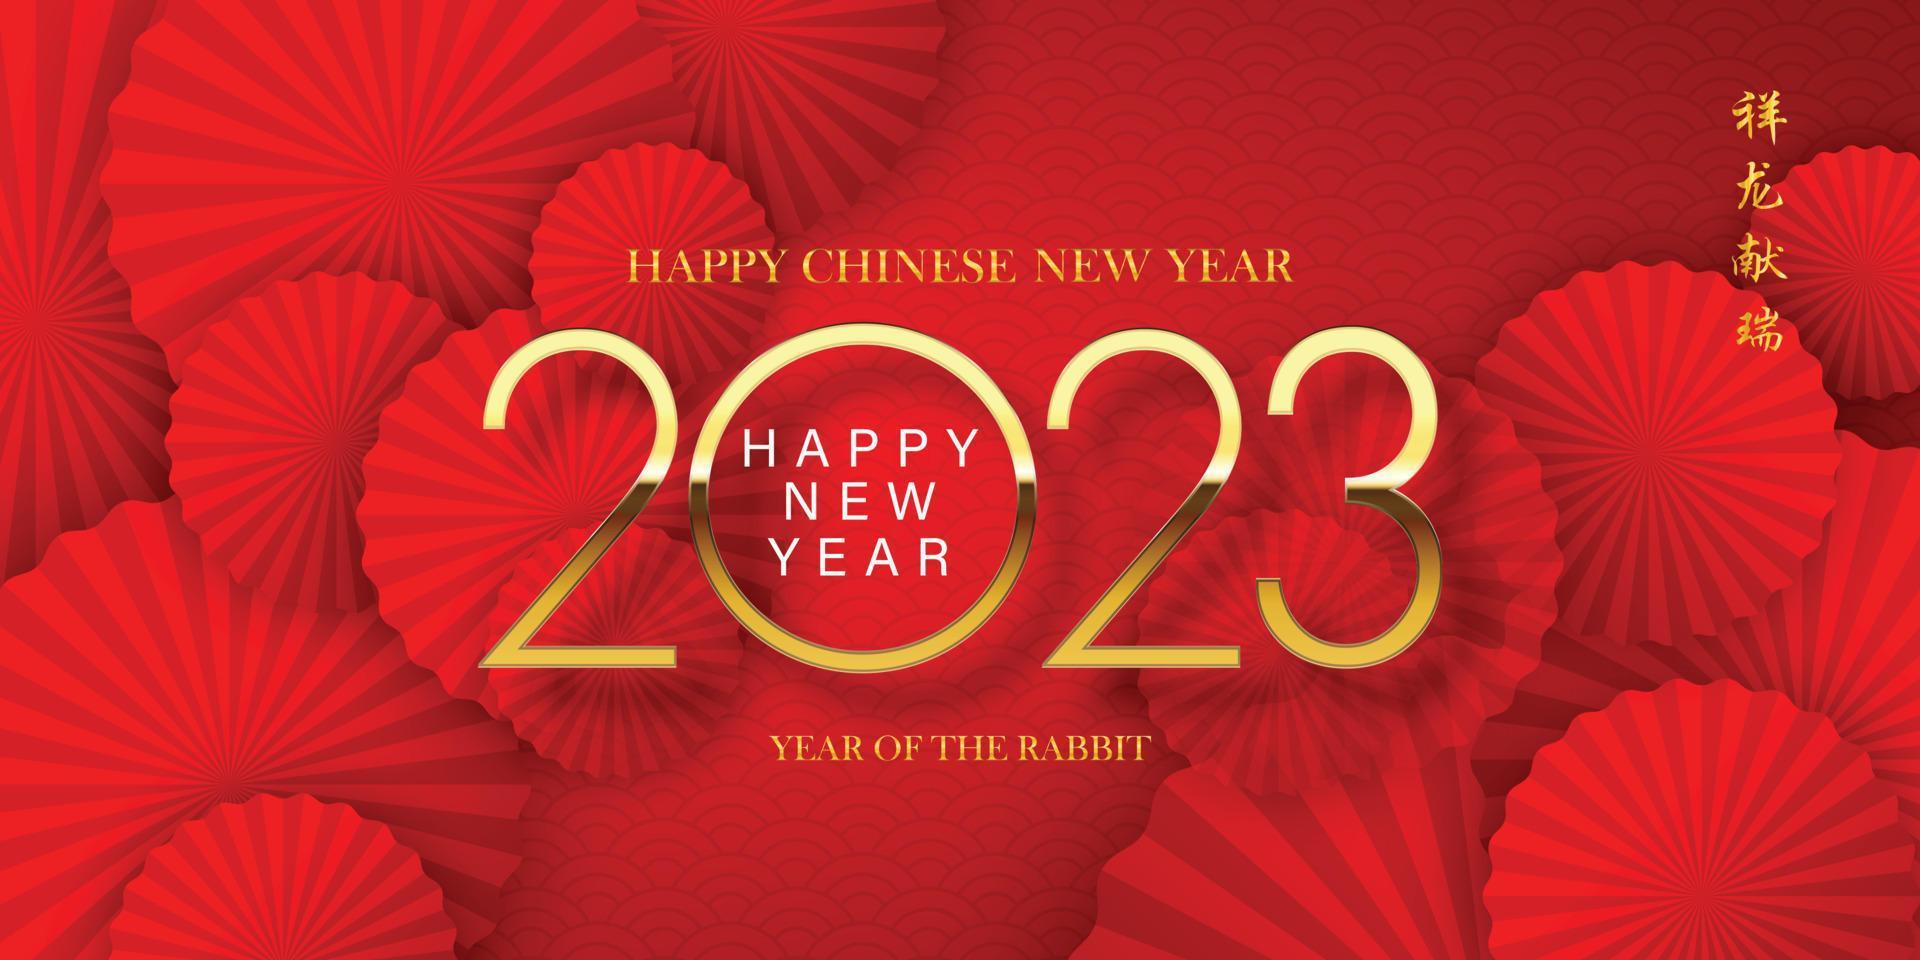 Happy Chinese New Year 2023, golden numbers on red background and fan. Chinese style, Chinese translation Chinese calendar for the rabbit of the year 2023 rabbit. vector